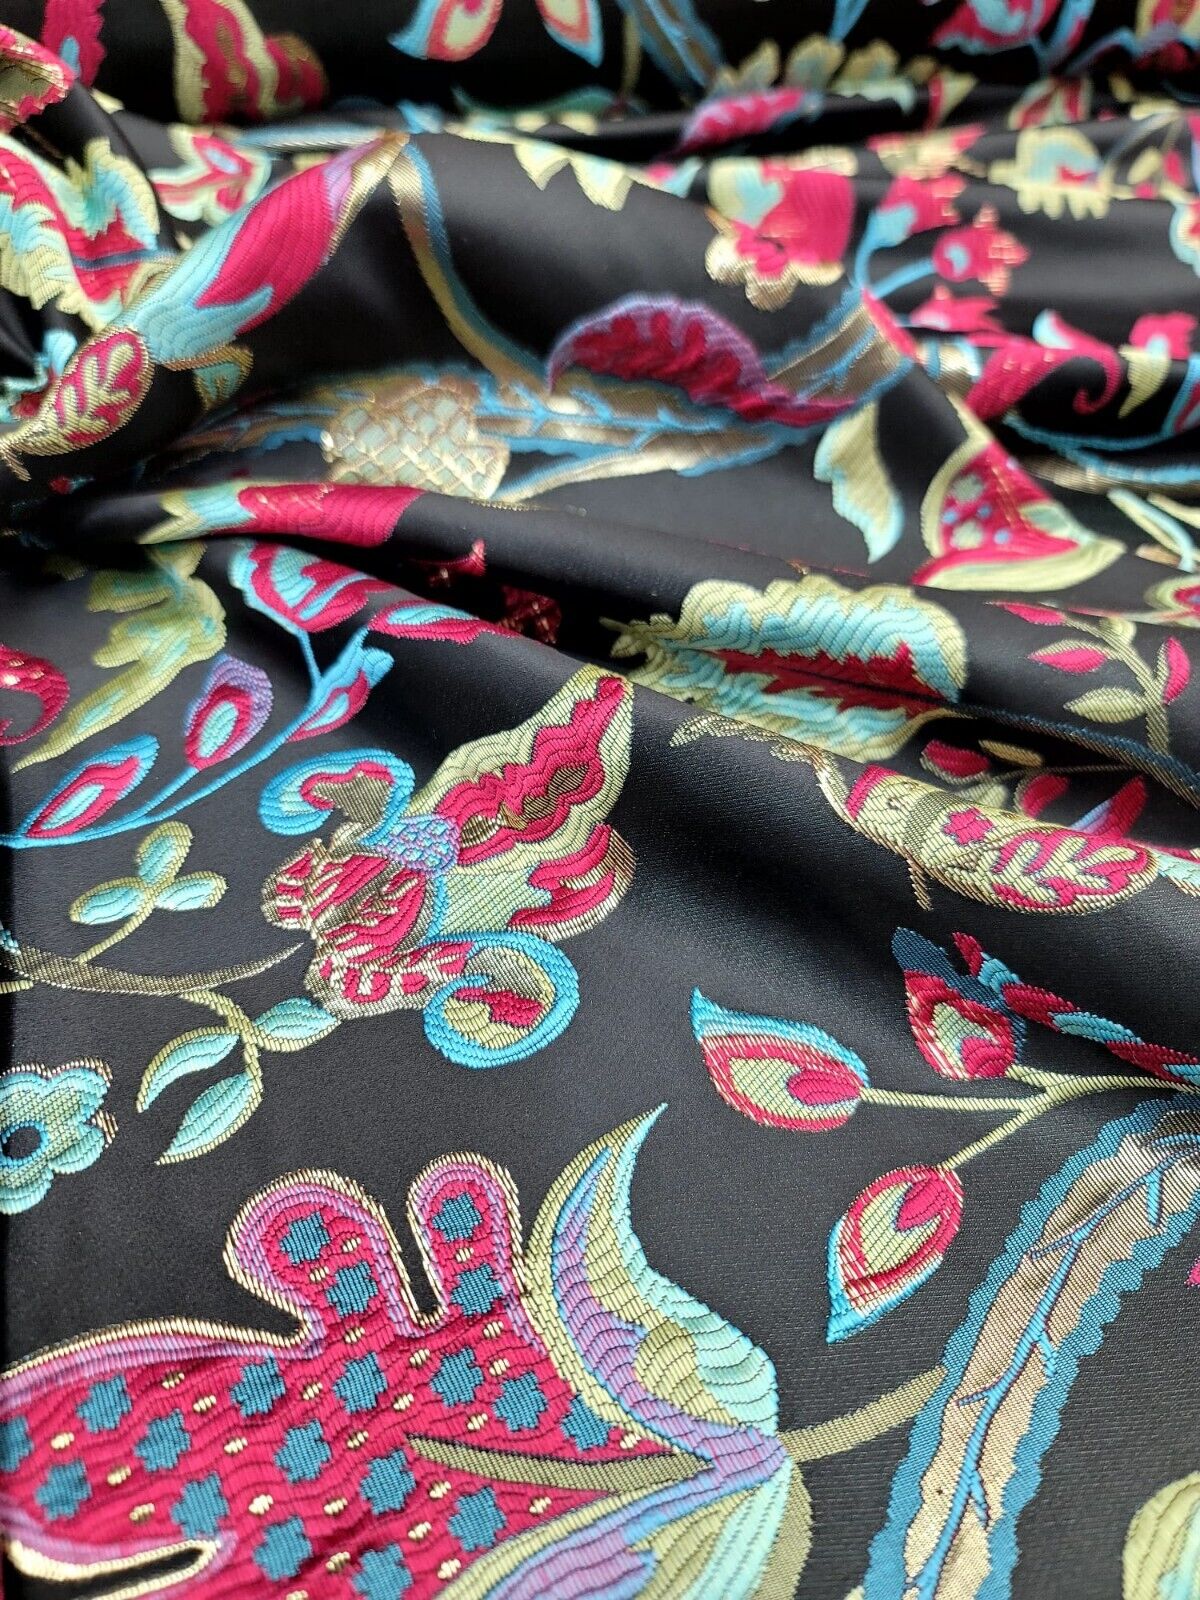 Vtg Brocade Upholstery Fabric By The Yard Green Fuchsia Blue Floral For Dress